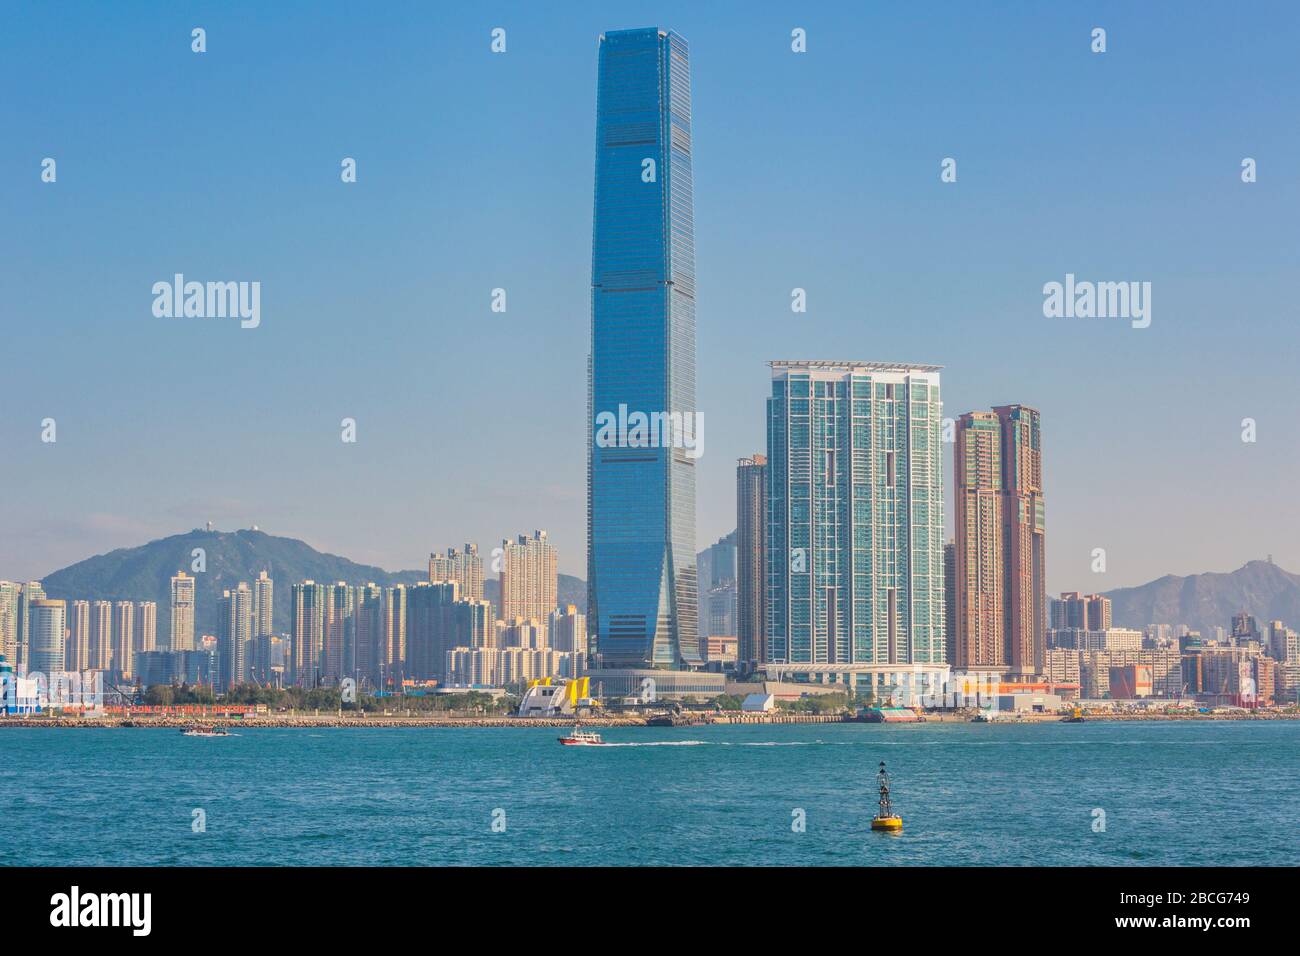 Hong Kong, China. The International Commerce Centre skyscraper on Kowloon.  The building is 118 storeys high. Stock Photo